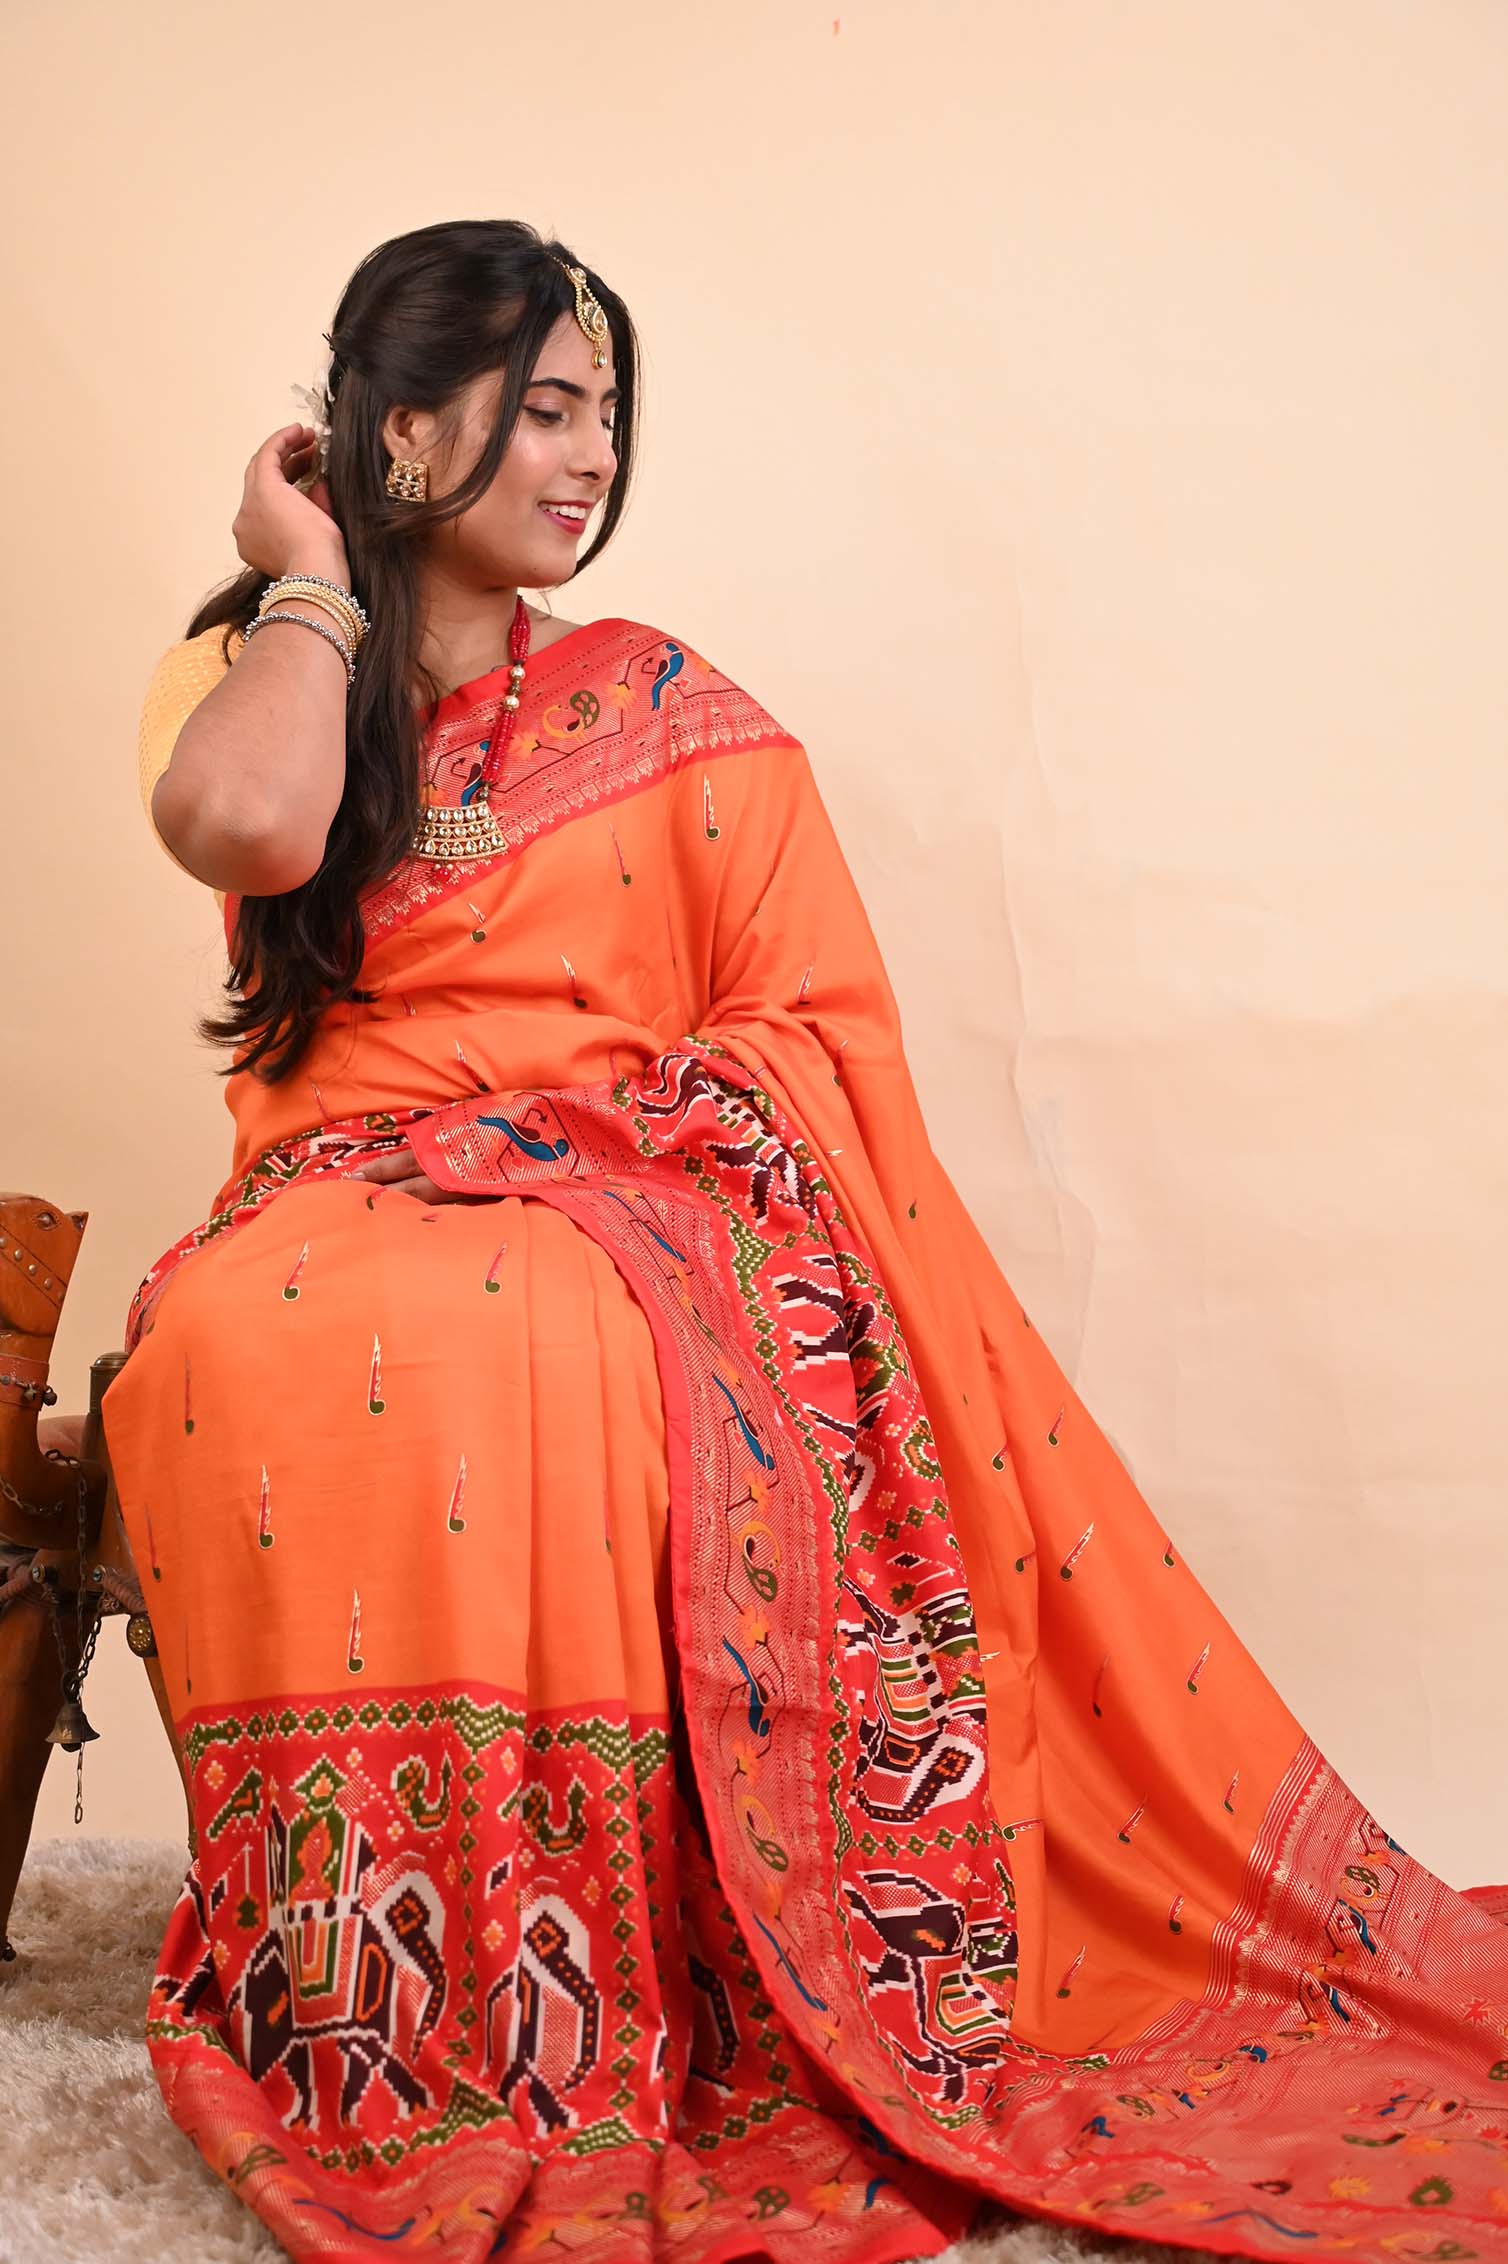 Ready To Wear Coral Orange With Madhubani Printed Contrast Border  Wrap in 1 minute saree - Isadora Life